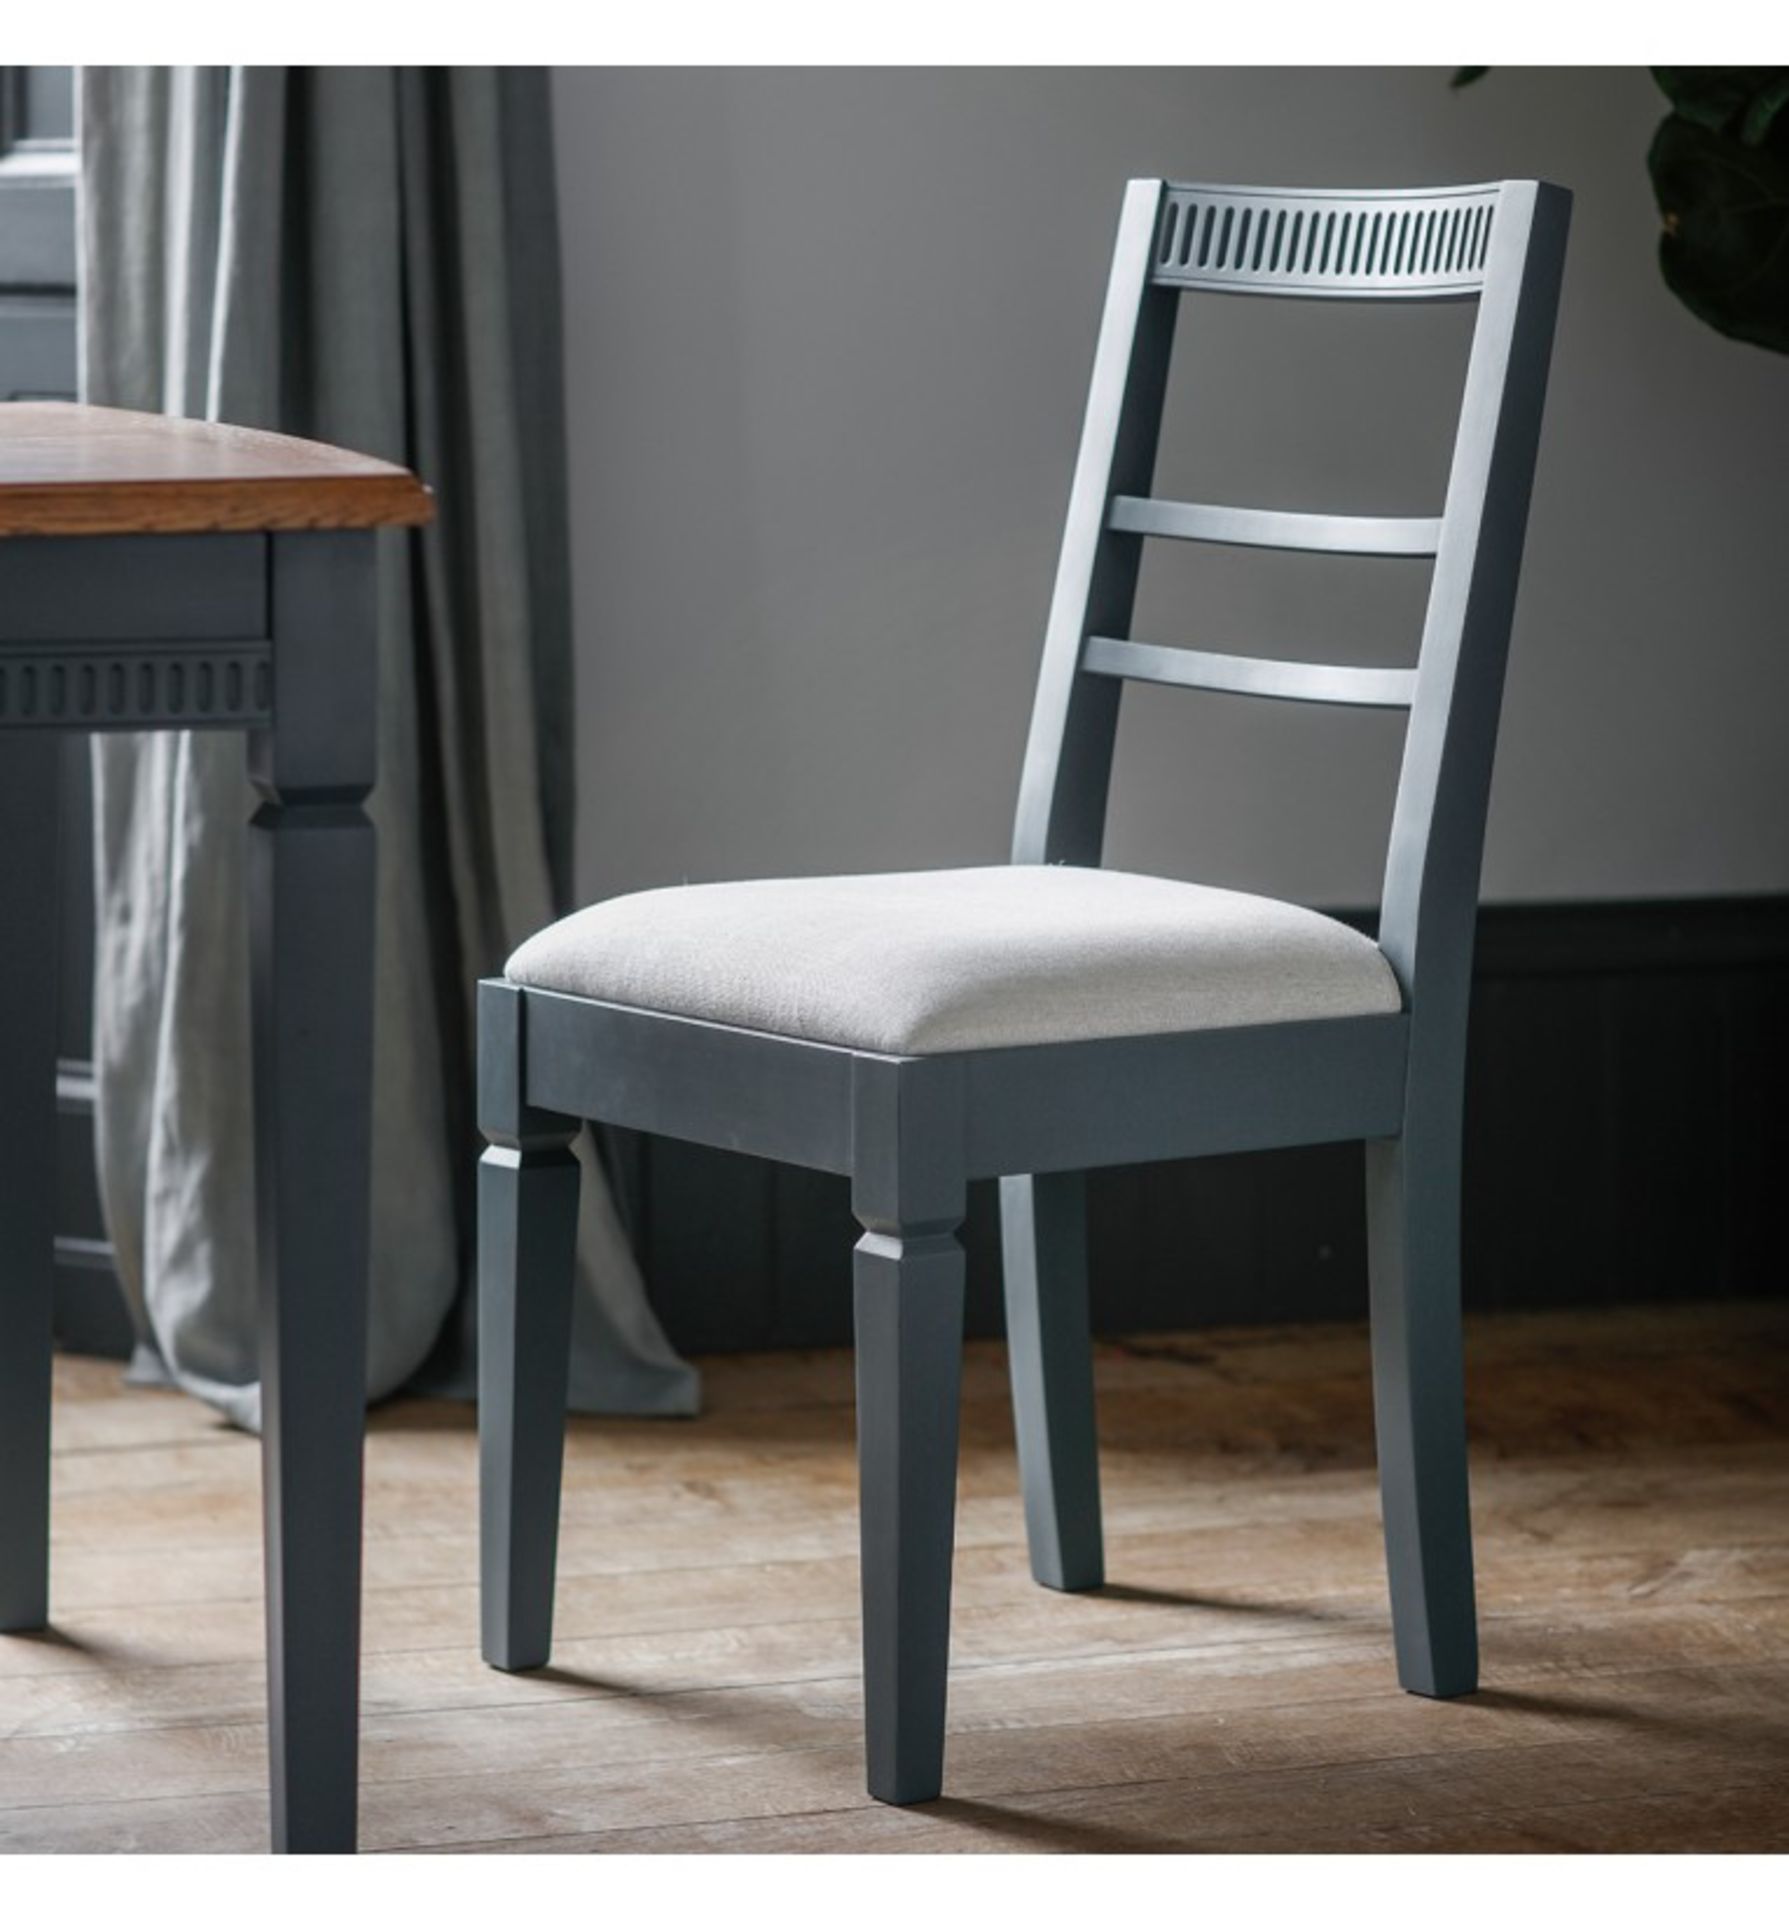 A Pair Bronte Dining Chair In Storm Is Made Using Painted Mahogany Solids With An Upholstered